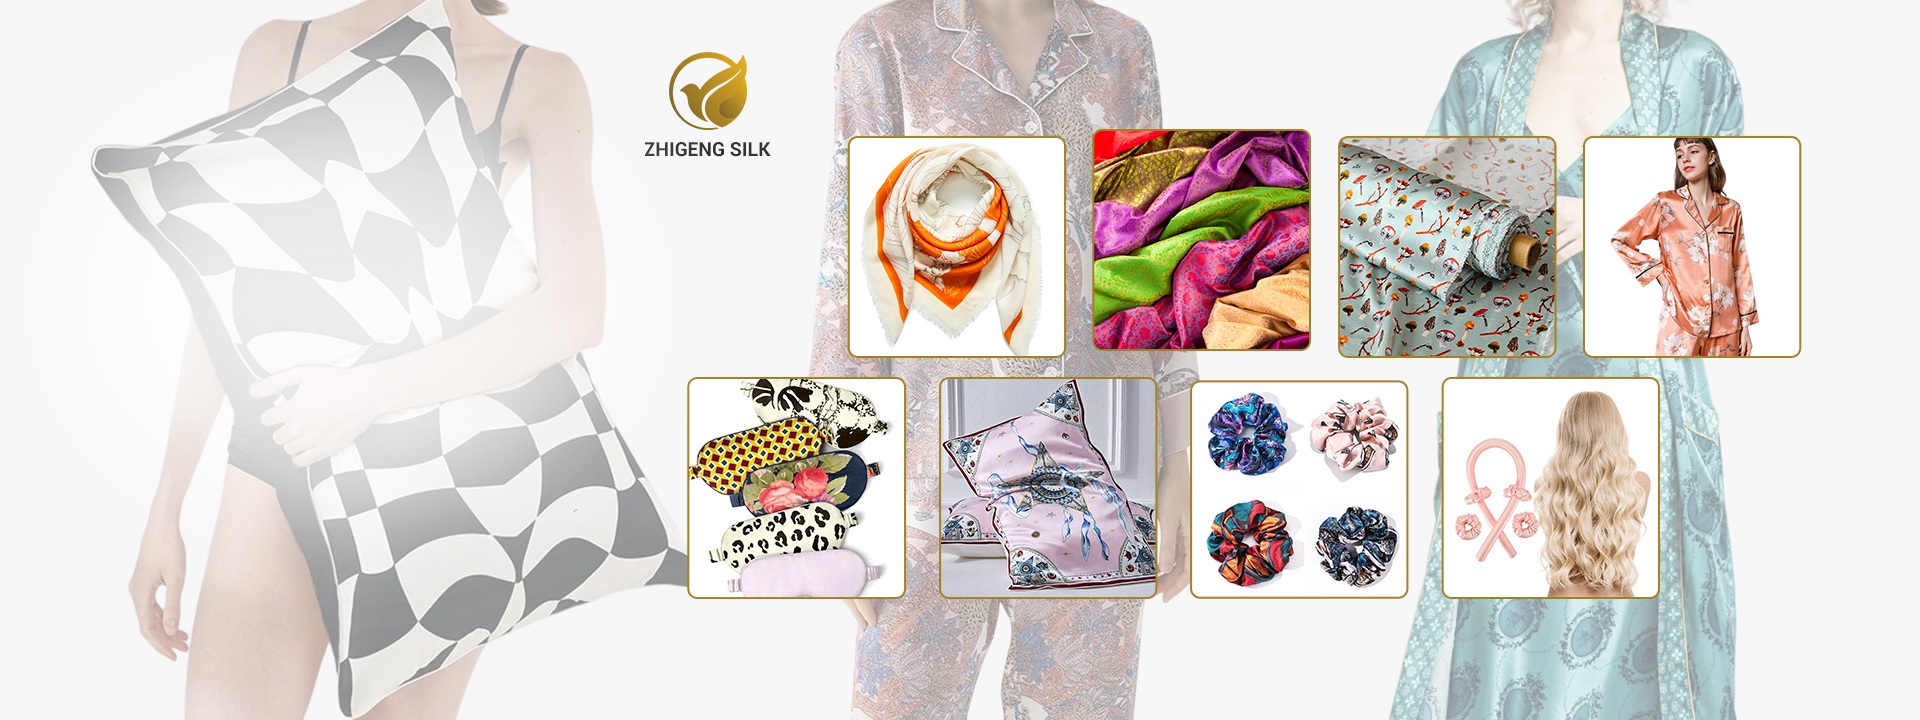 high-end silk products